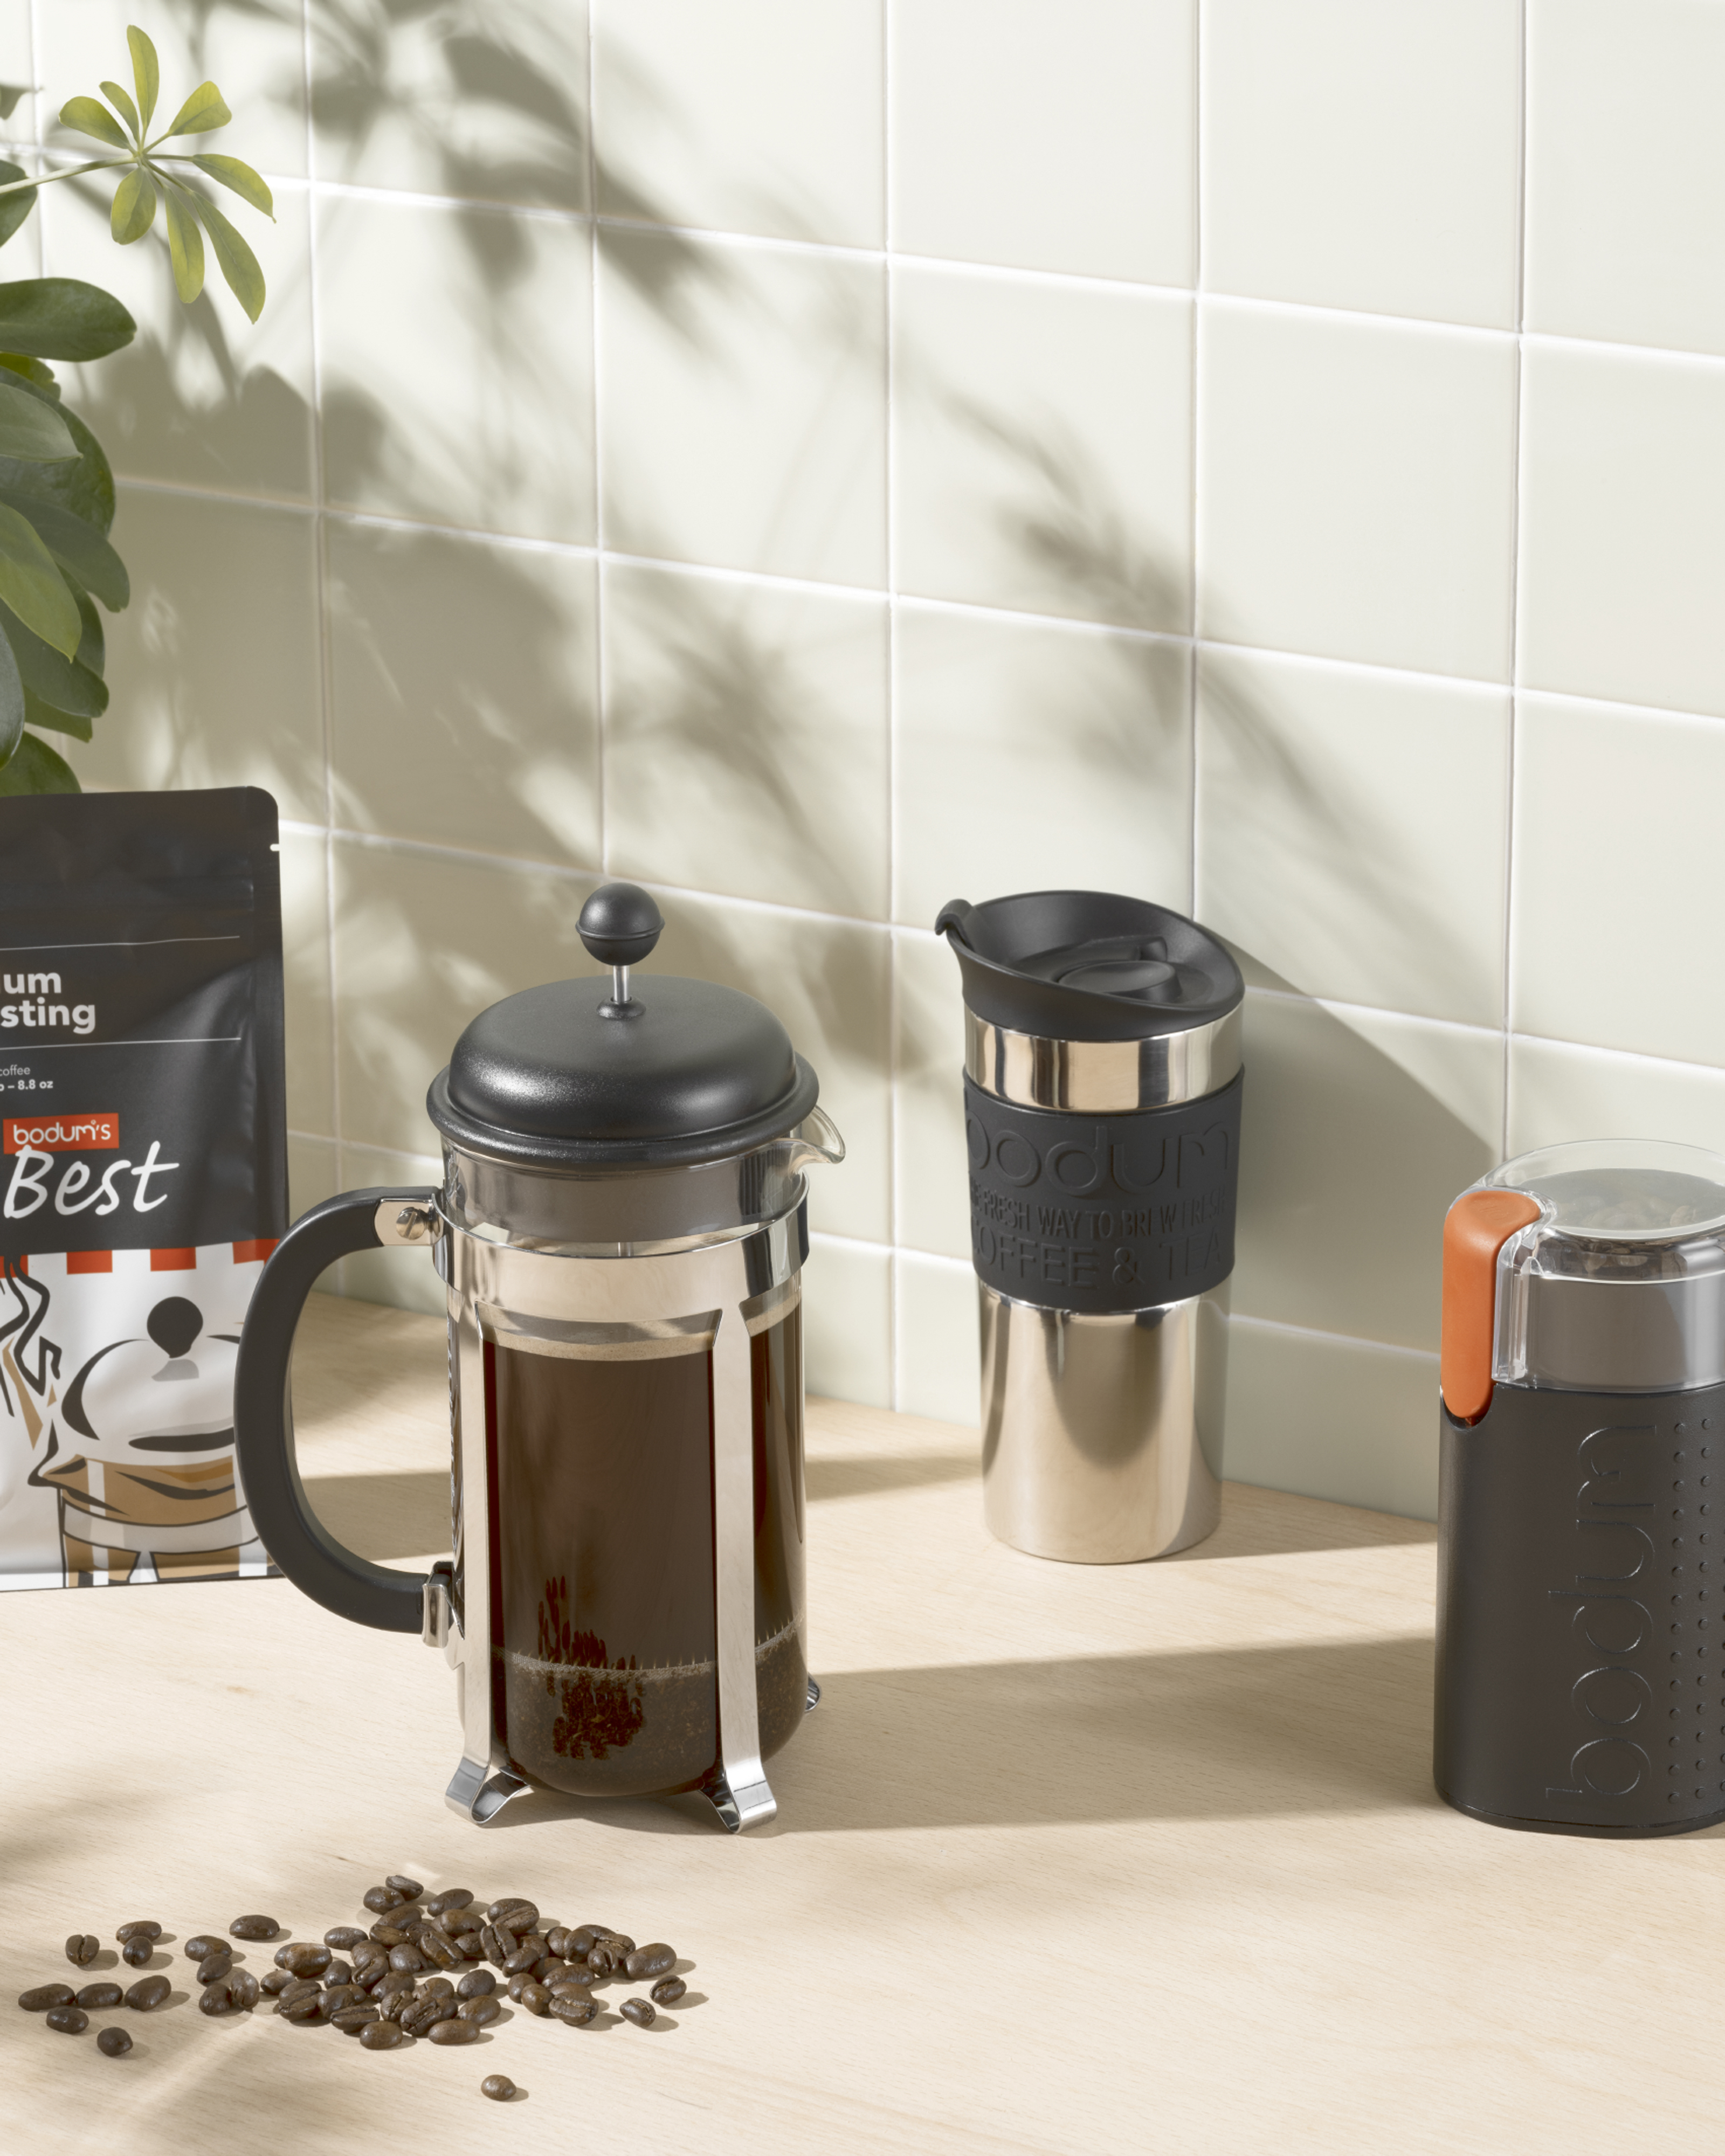 Insulated travel mug made of stainless steel and flip cover 35 cl - Bodum